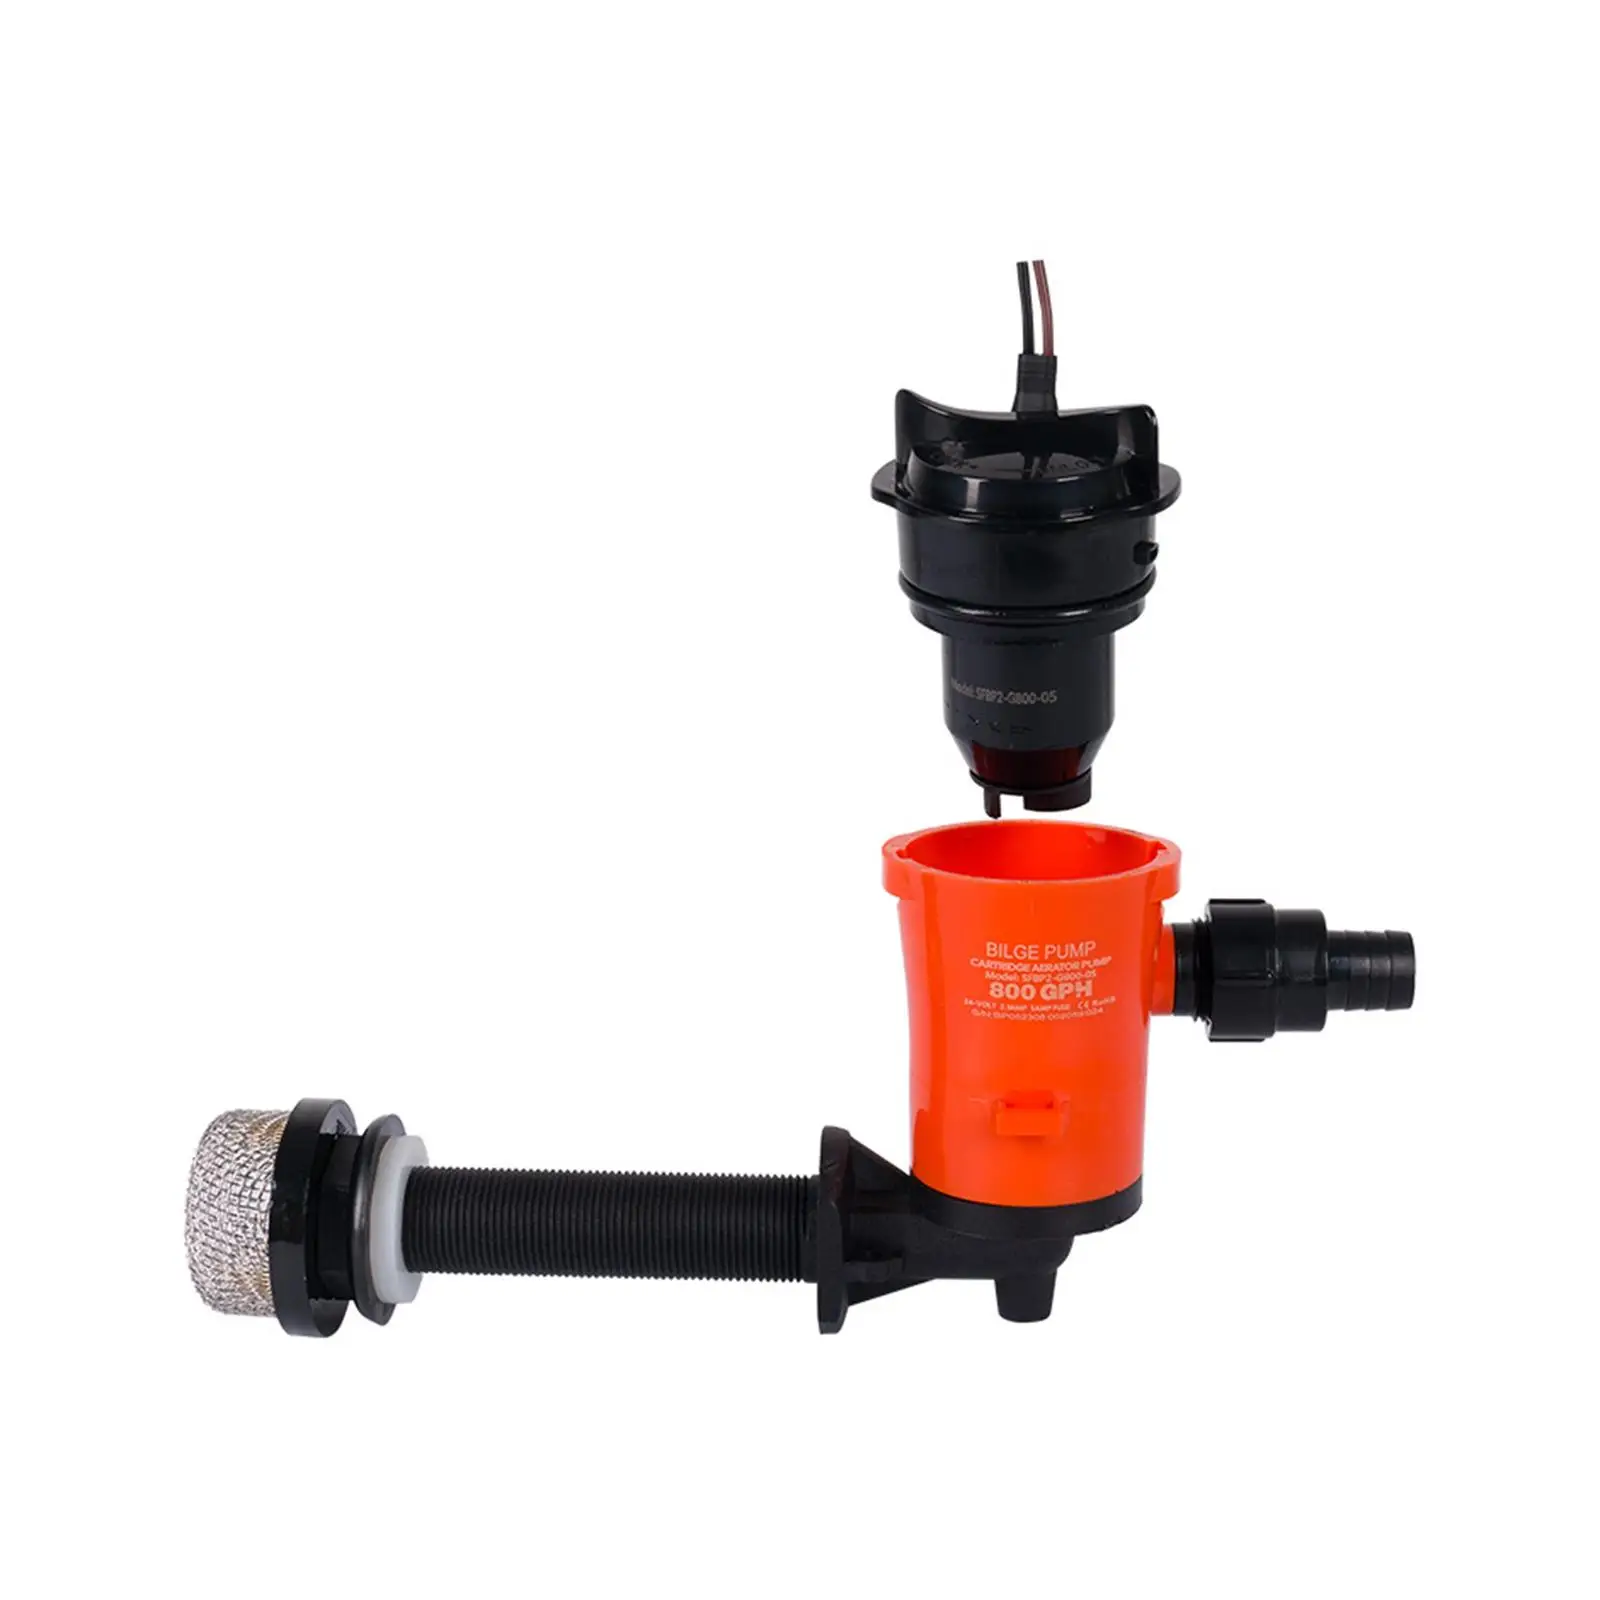 Livewell Pump Assembly with Filter Boat Tools Accessory 24V 800GPH Durable Bilge Pump Easy Installation Replaces Boat Bilge Pump